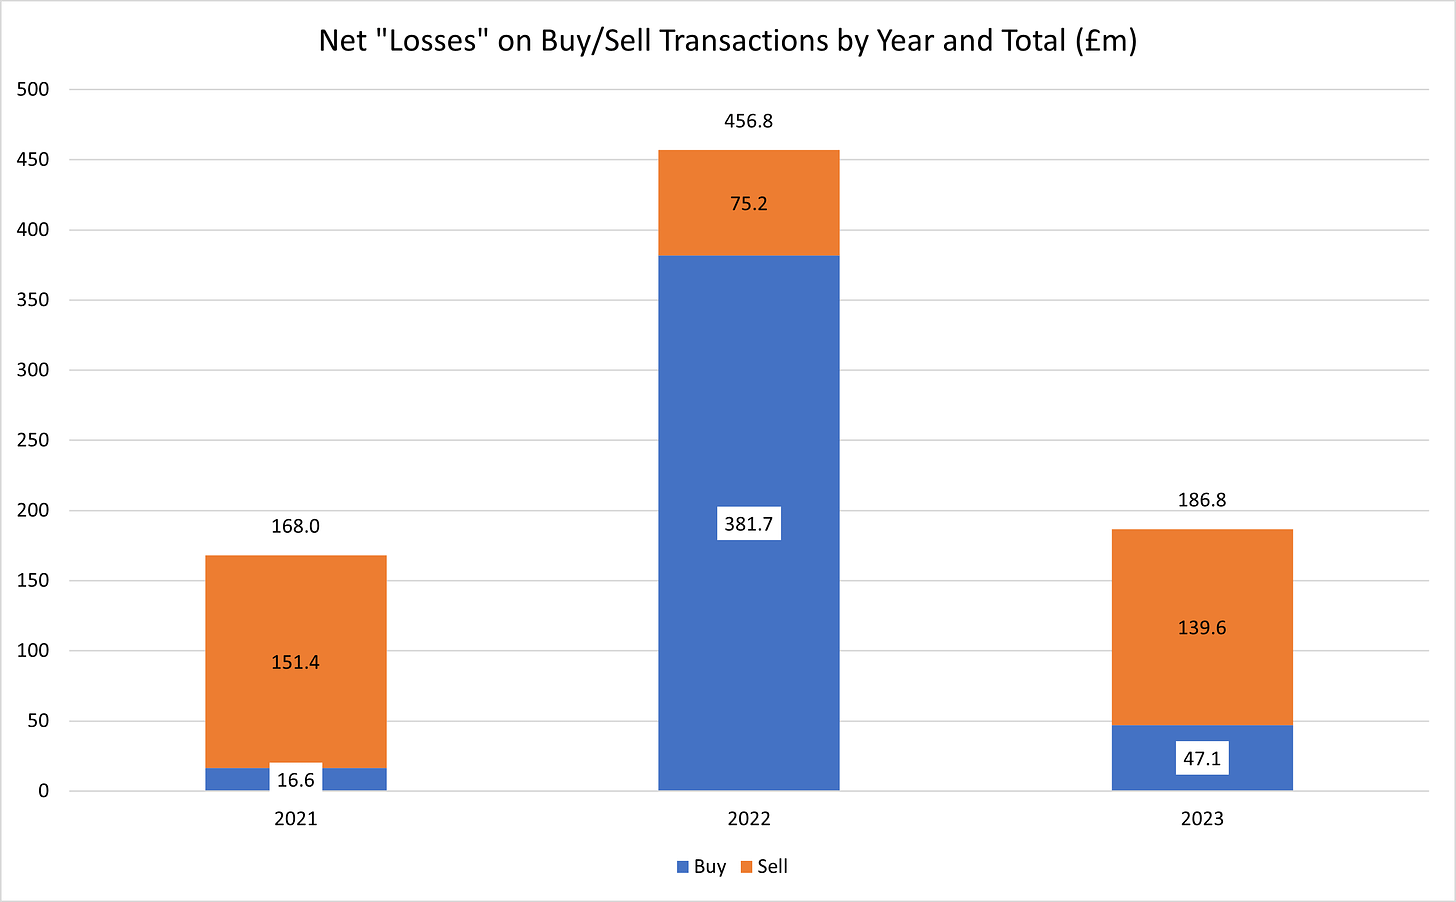 Figure 8 - Net Losses on Buy-Sell Transactions and Total by Year (£m)